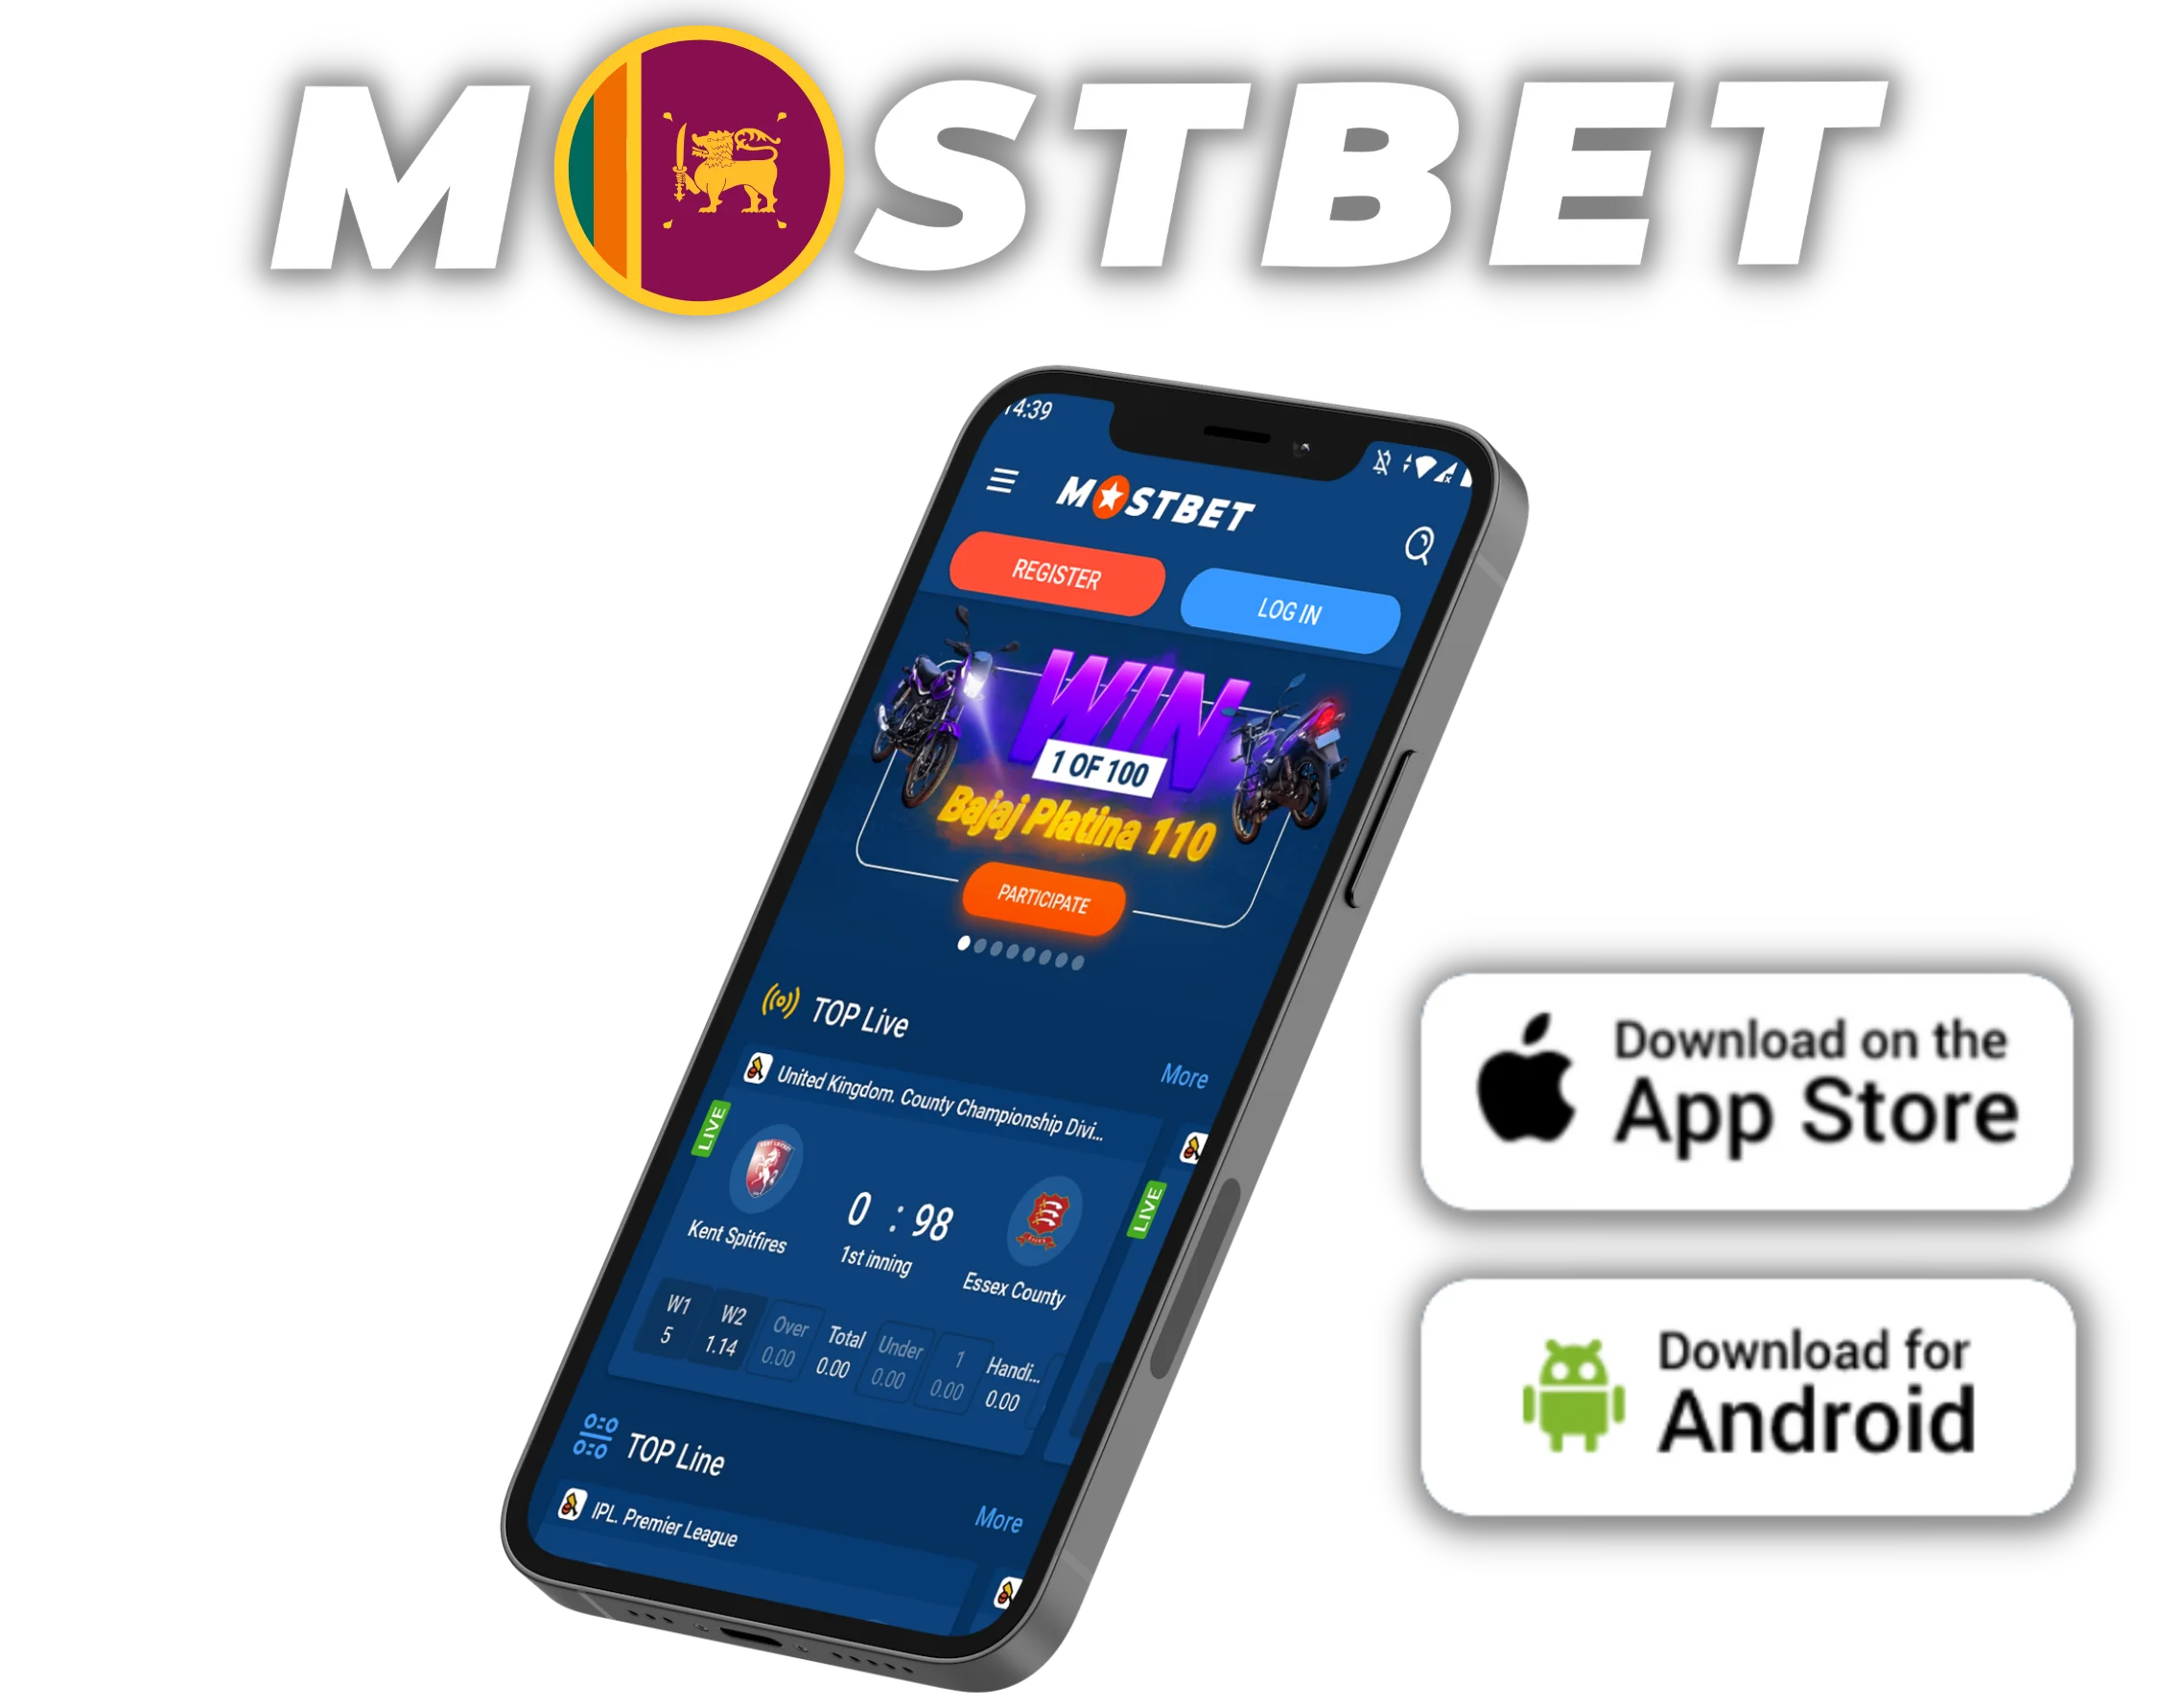 Can You Really Find Mostbet provides a comprehensive and enjoyable betting and gaming experience. With its extensive range of games, user-friendly platform, and commitment to security and fairness, Mostbet stands as a top choice for online betting and gaming enthusiasts.?